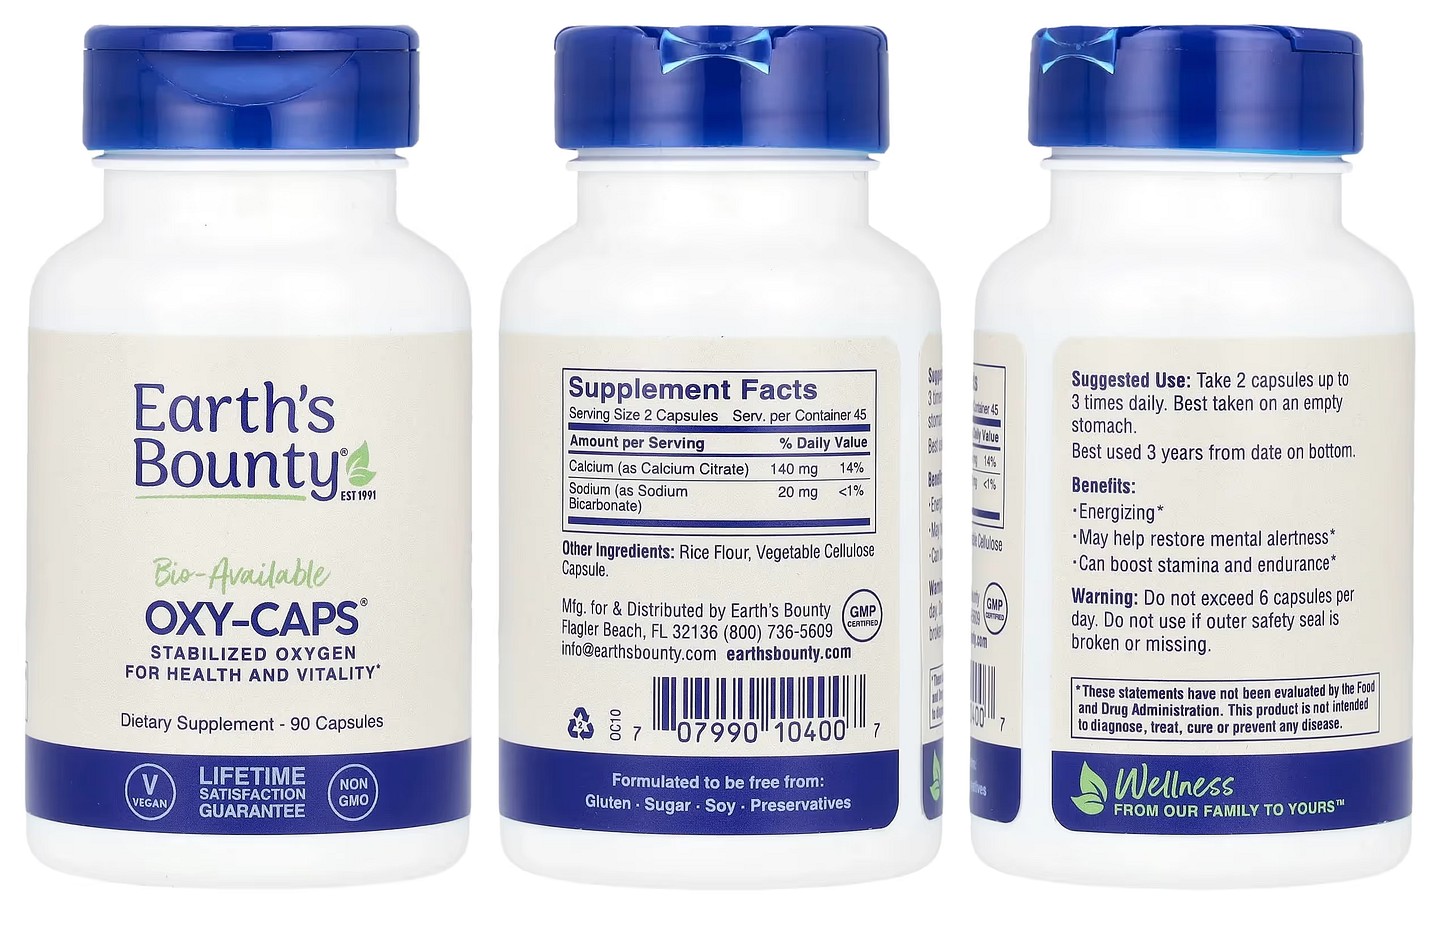 Earth's Bounty, Oxy-Caps packaging